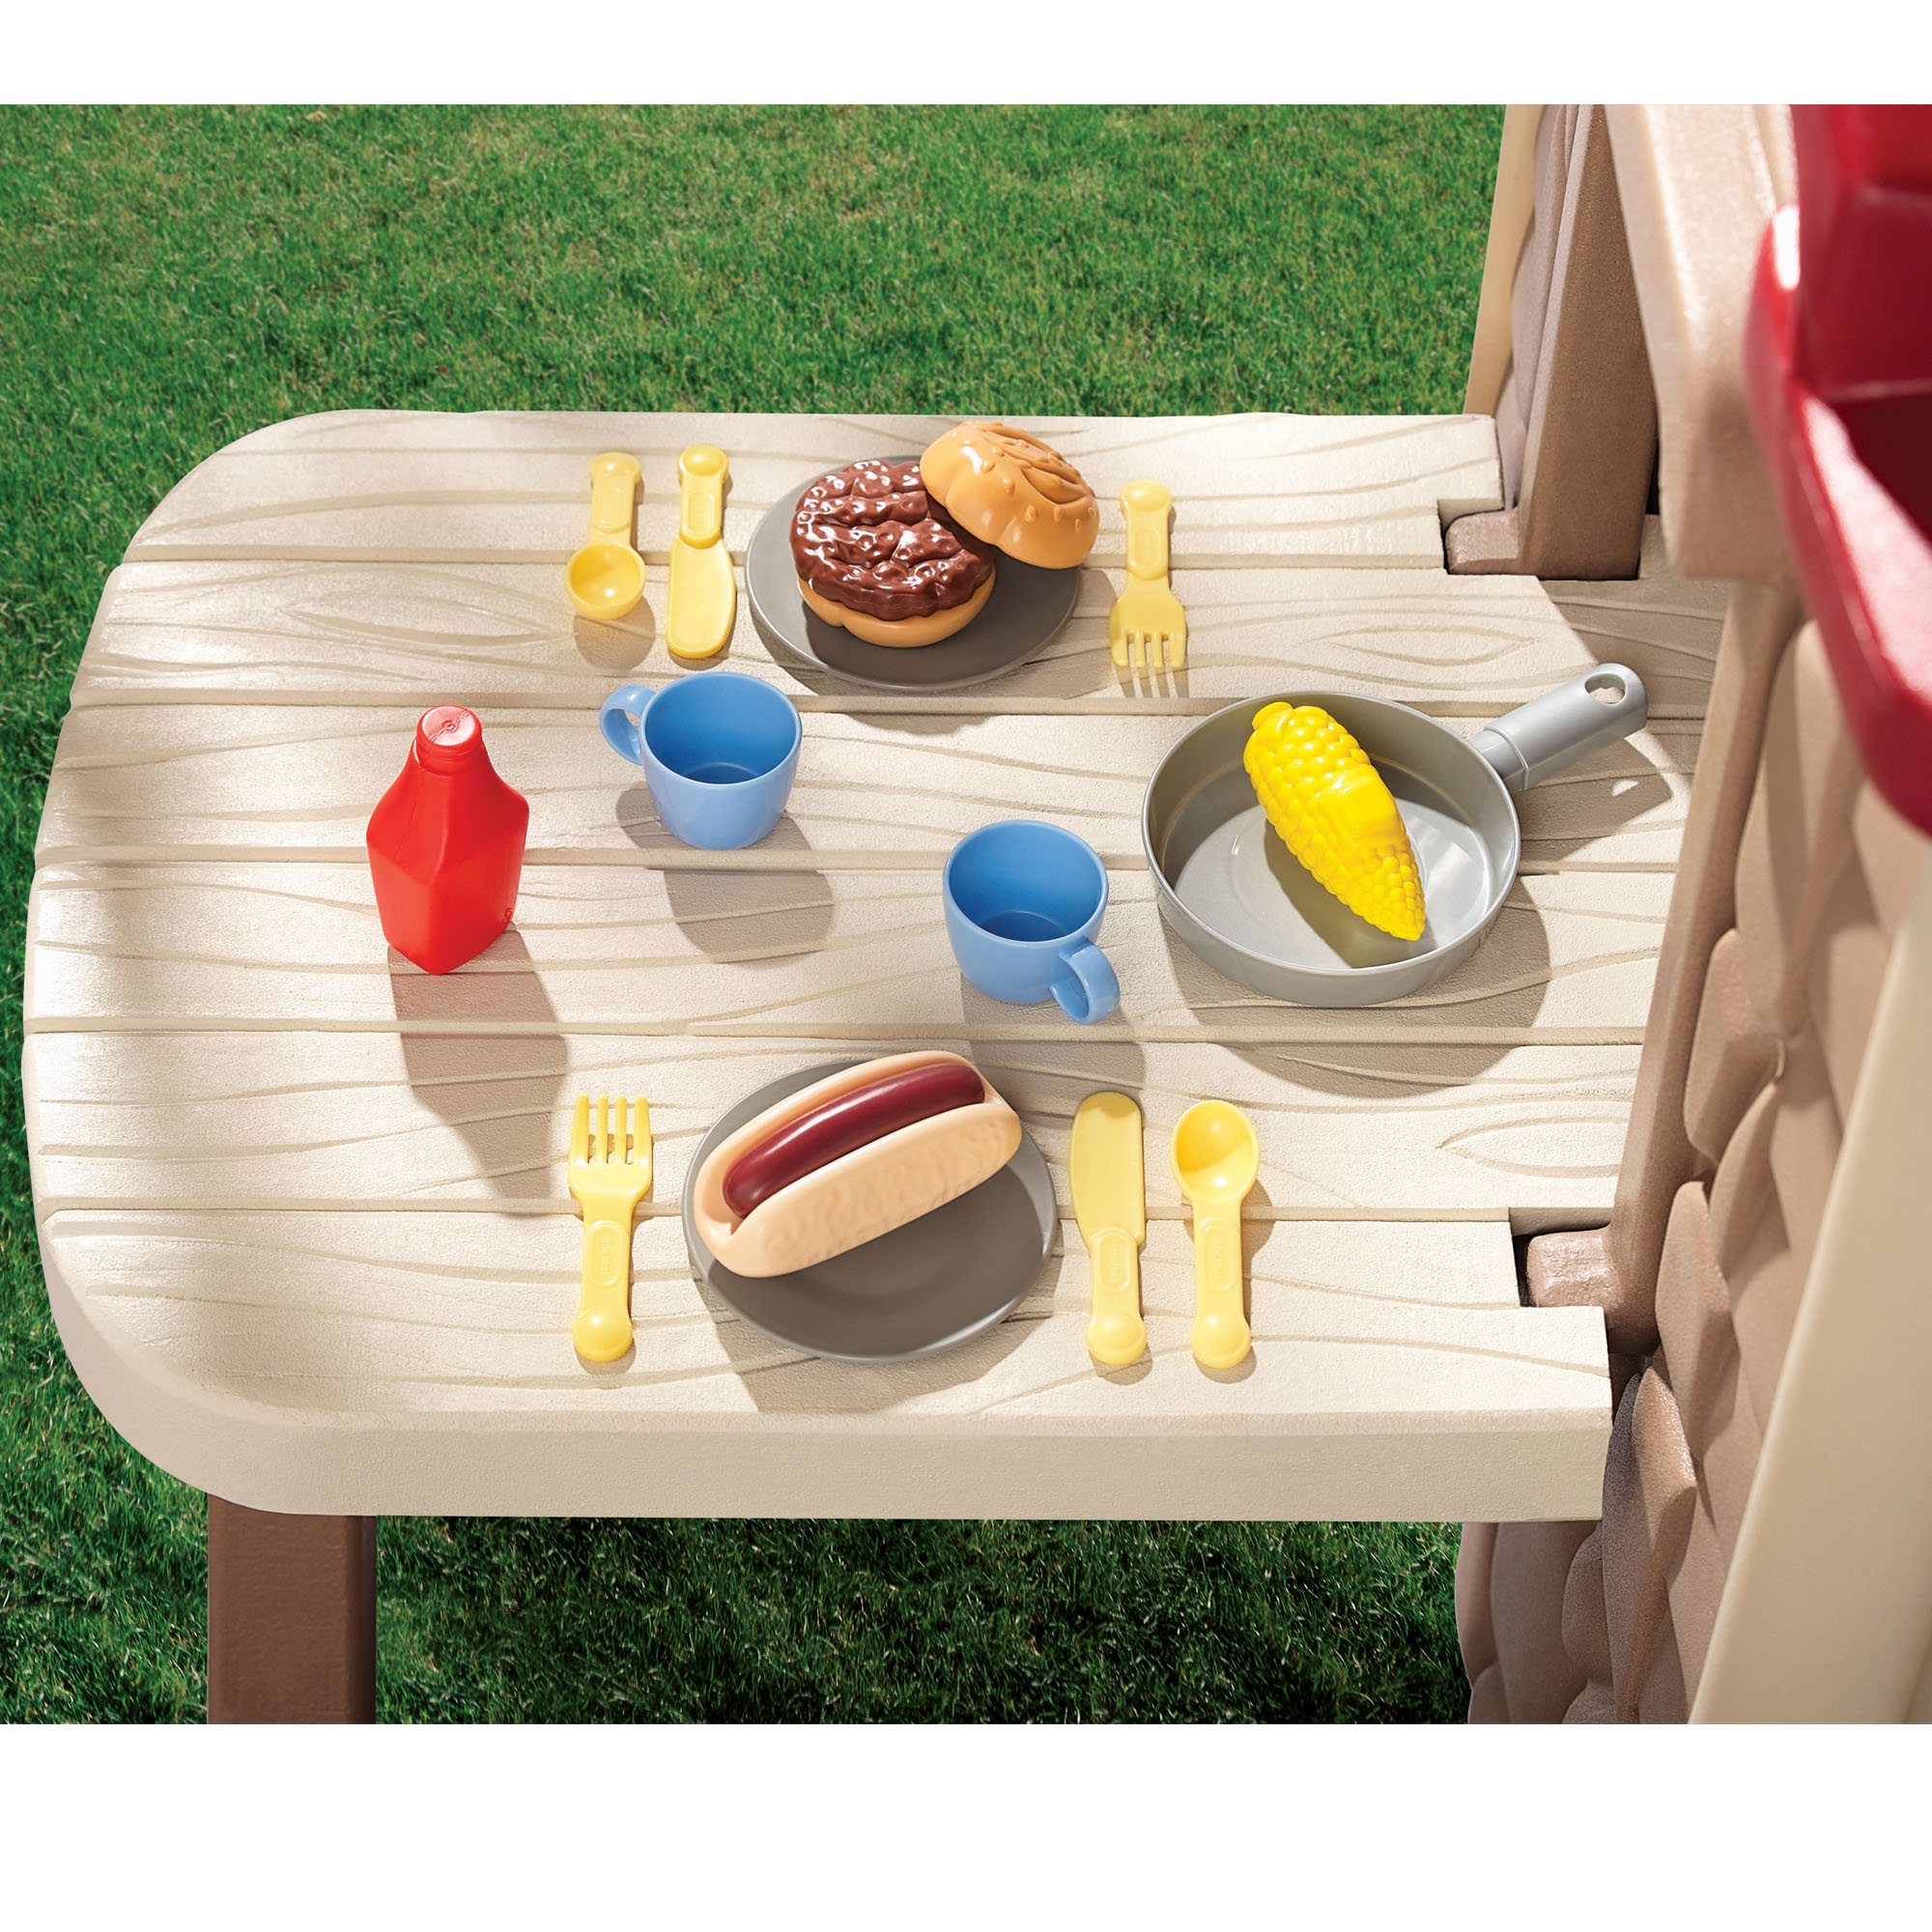 Little Tikes Picnic on the Patio Playhouse with 20 Play Accessories, Working Doorbell, Indoor and Outdoor Backyard Toy, Tan- For Kids Toddlers Boys Girls Ages 2 3 4+ Year Old - image 5 of 5